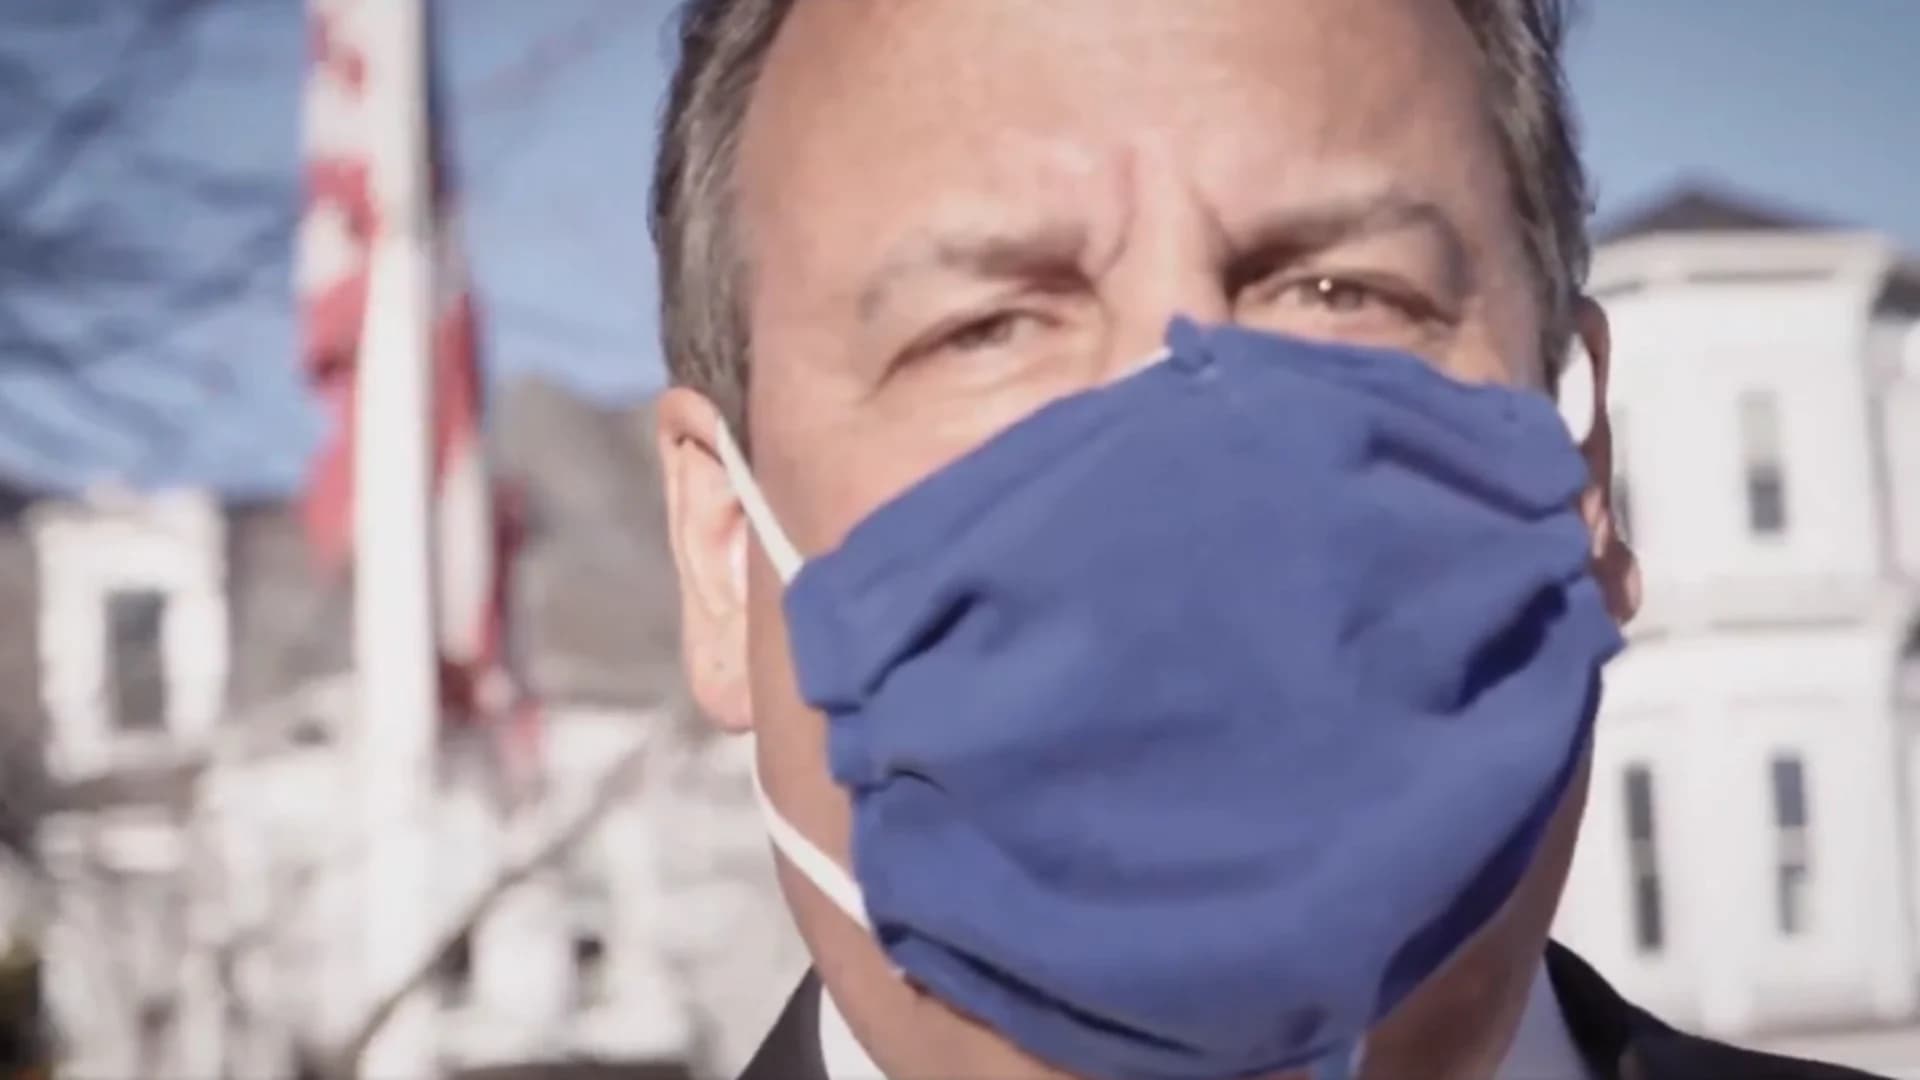 Former Gov. Christie appears in national ad promoting mask-wearing